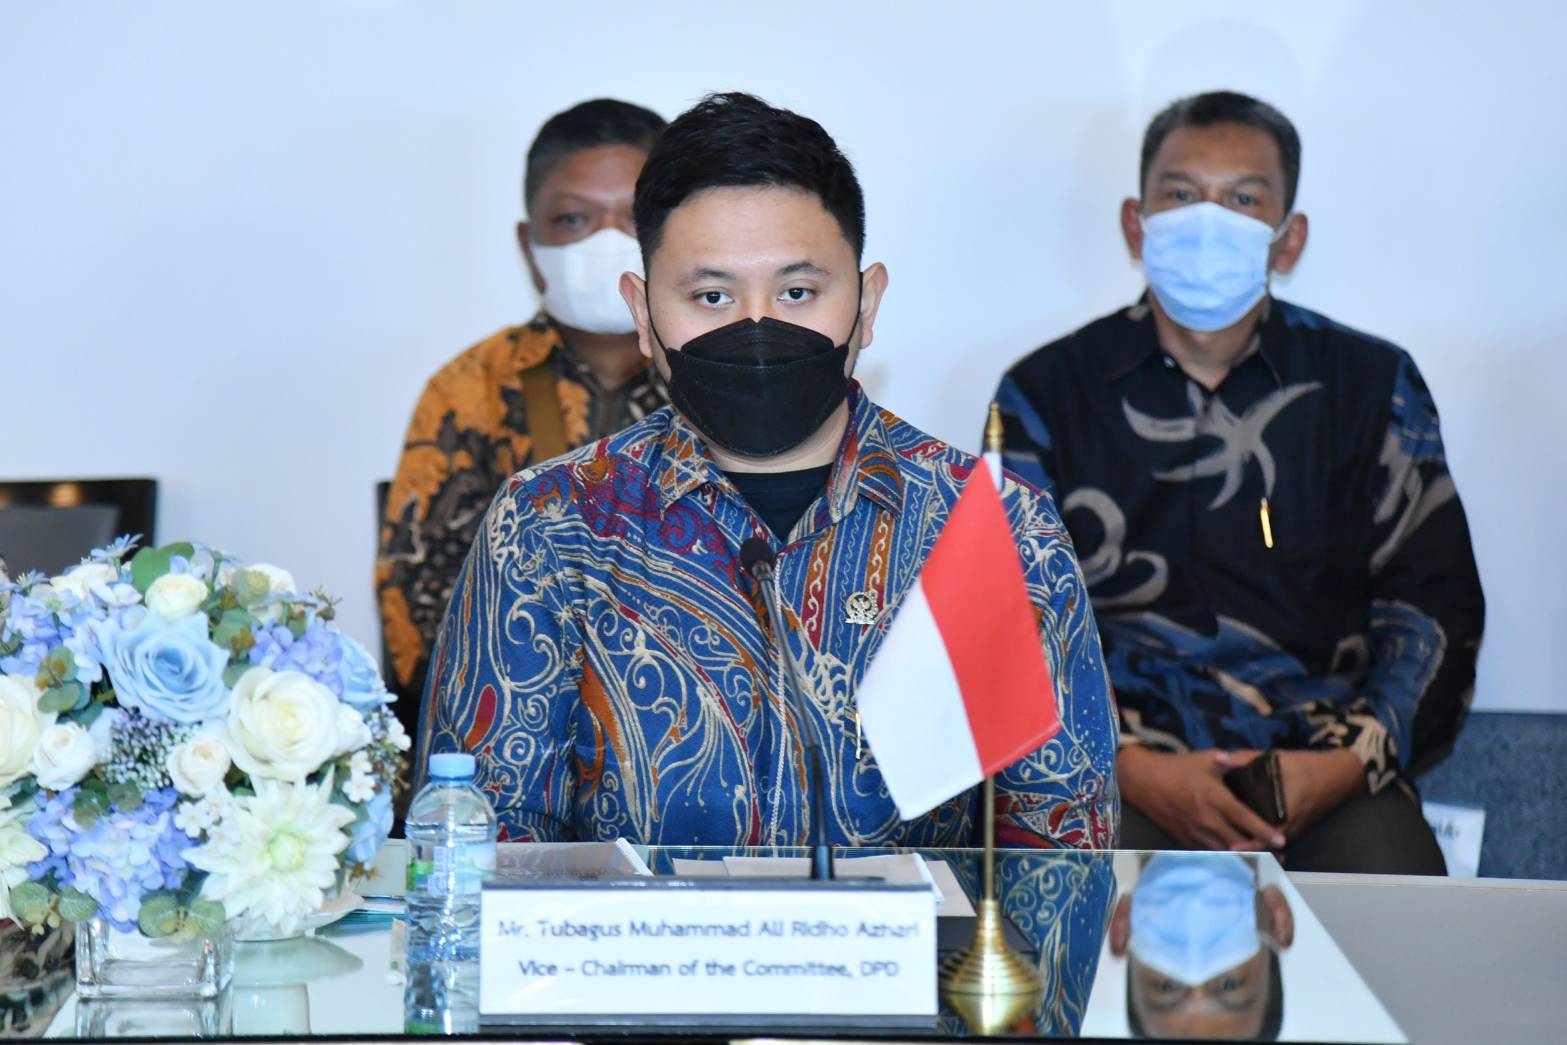 Mr. Tubagus Muhammad Ali Ridho Azhari Second Vice-Chairman of the House Committee for Inter-Parliament Cooperation Regional Leadership Council of the Republic of Indonesia Paid a Courtesy Call on the President of the Senate (Thursday, 23rd June 2022)